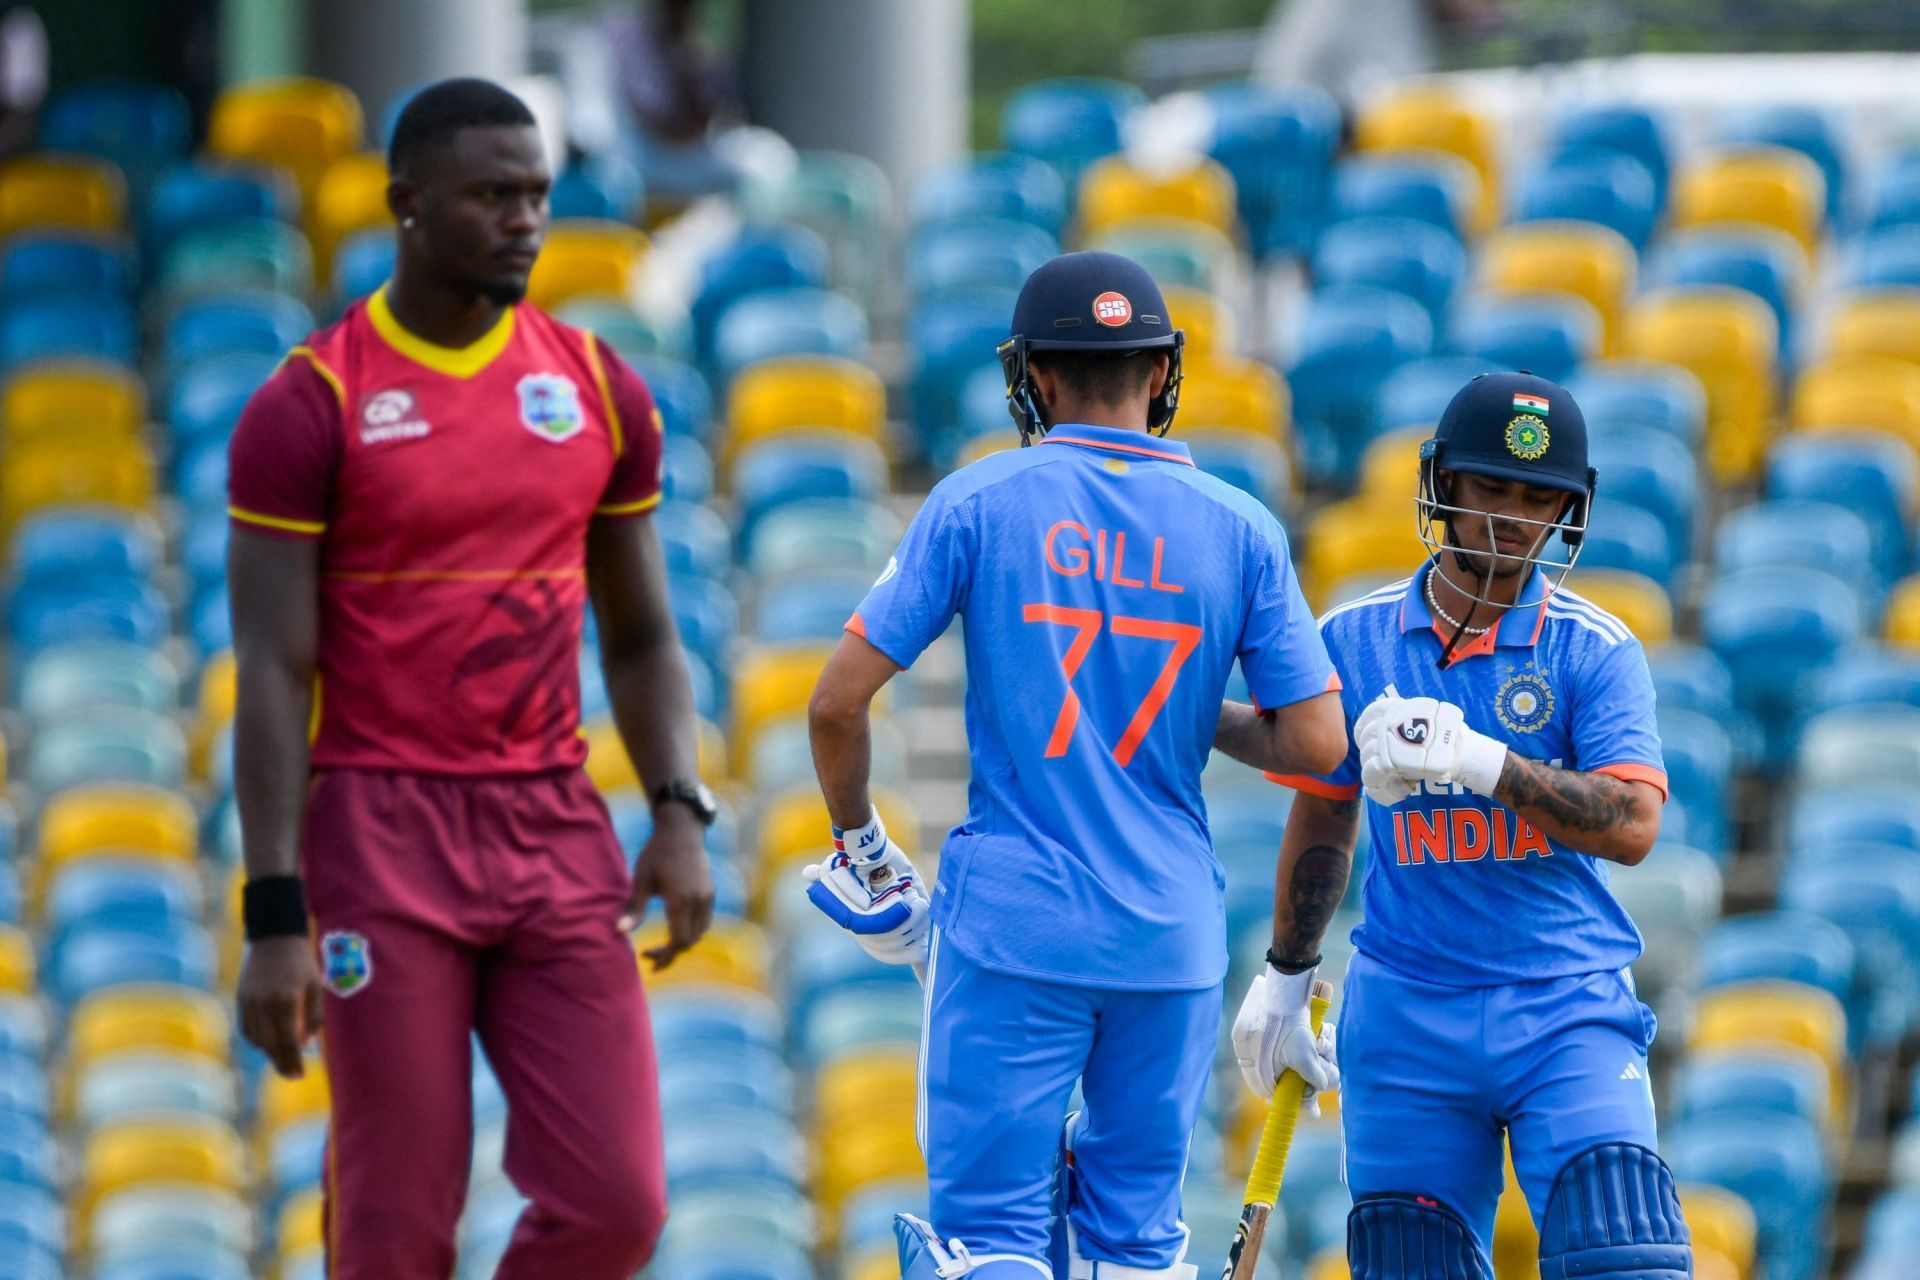 India have a few top-order options in the mix for the T20I series